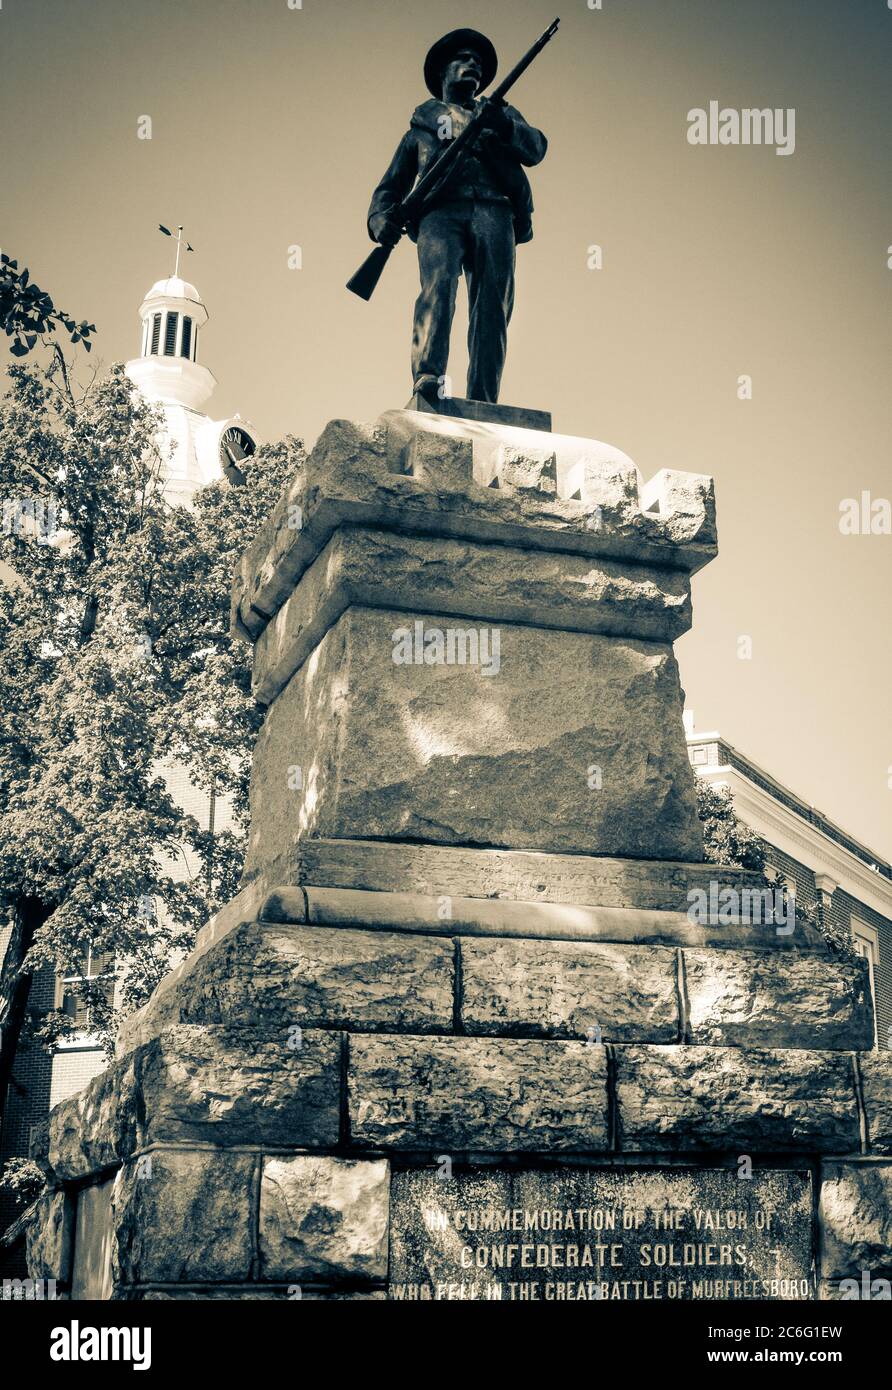 A commemorative Confederate Solider Statue on plinth base with plaque dedication to fallen confederate soldiers at the Rutherford County Courthouse in Stock Photo